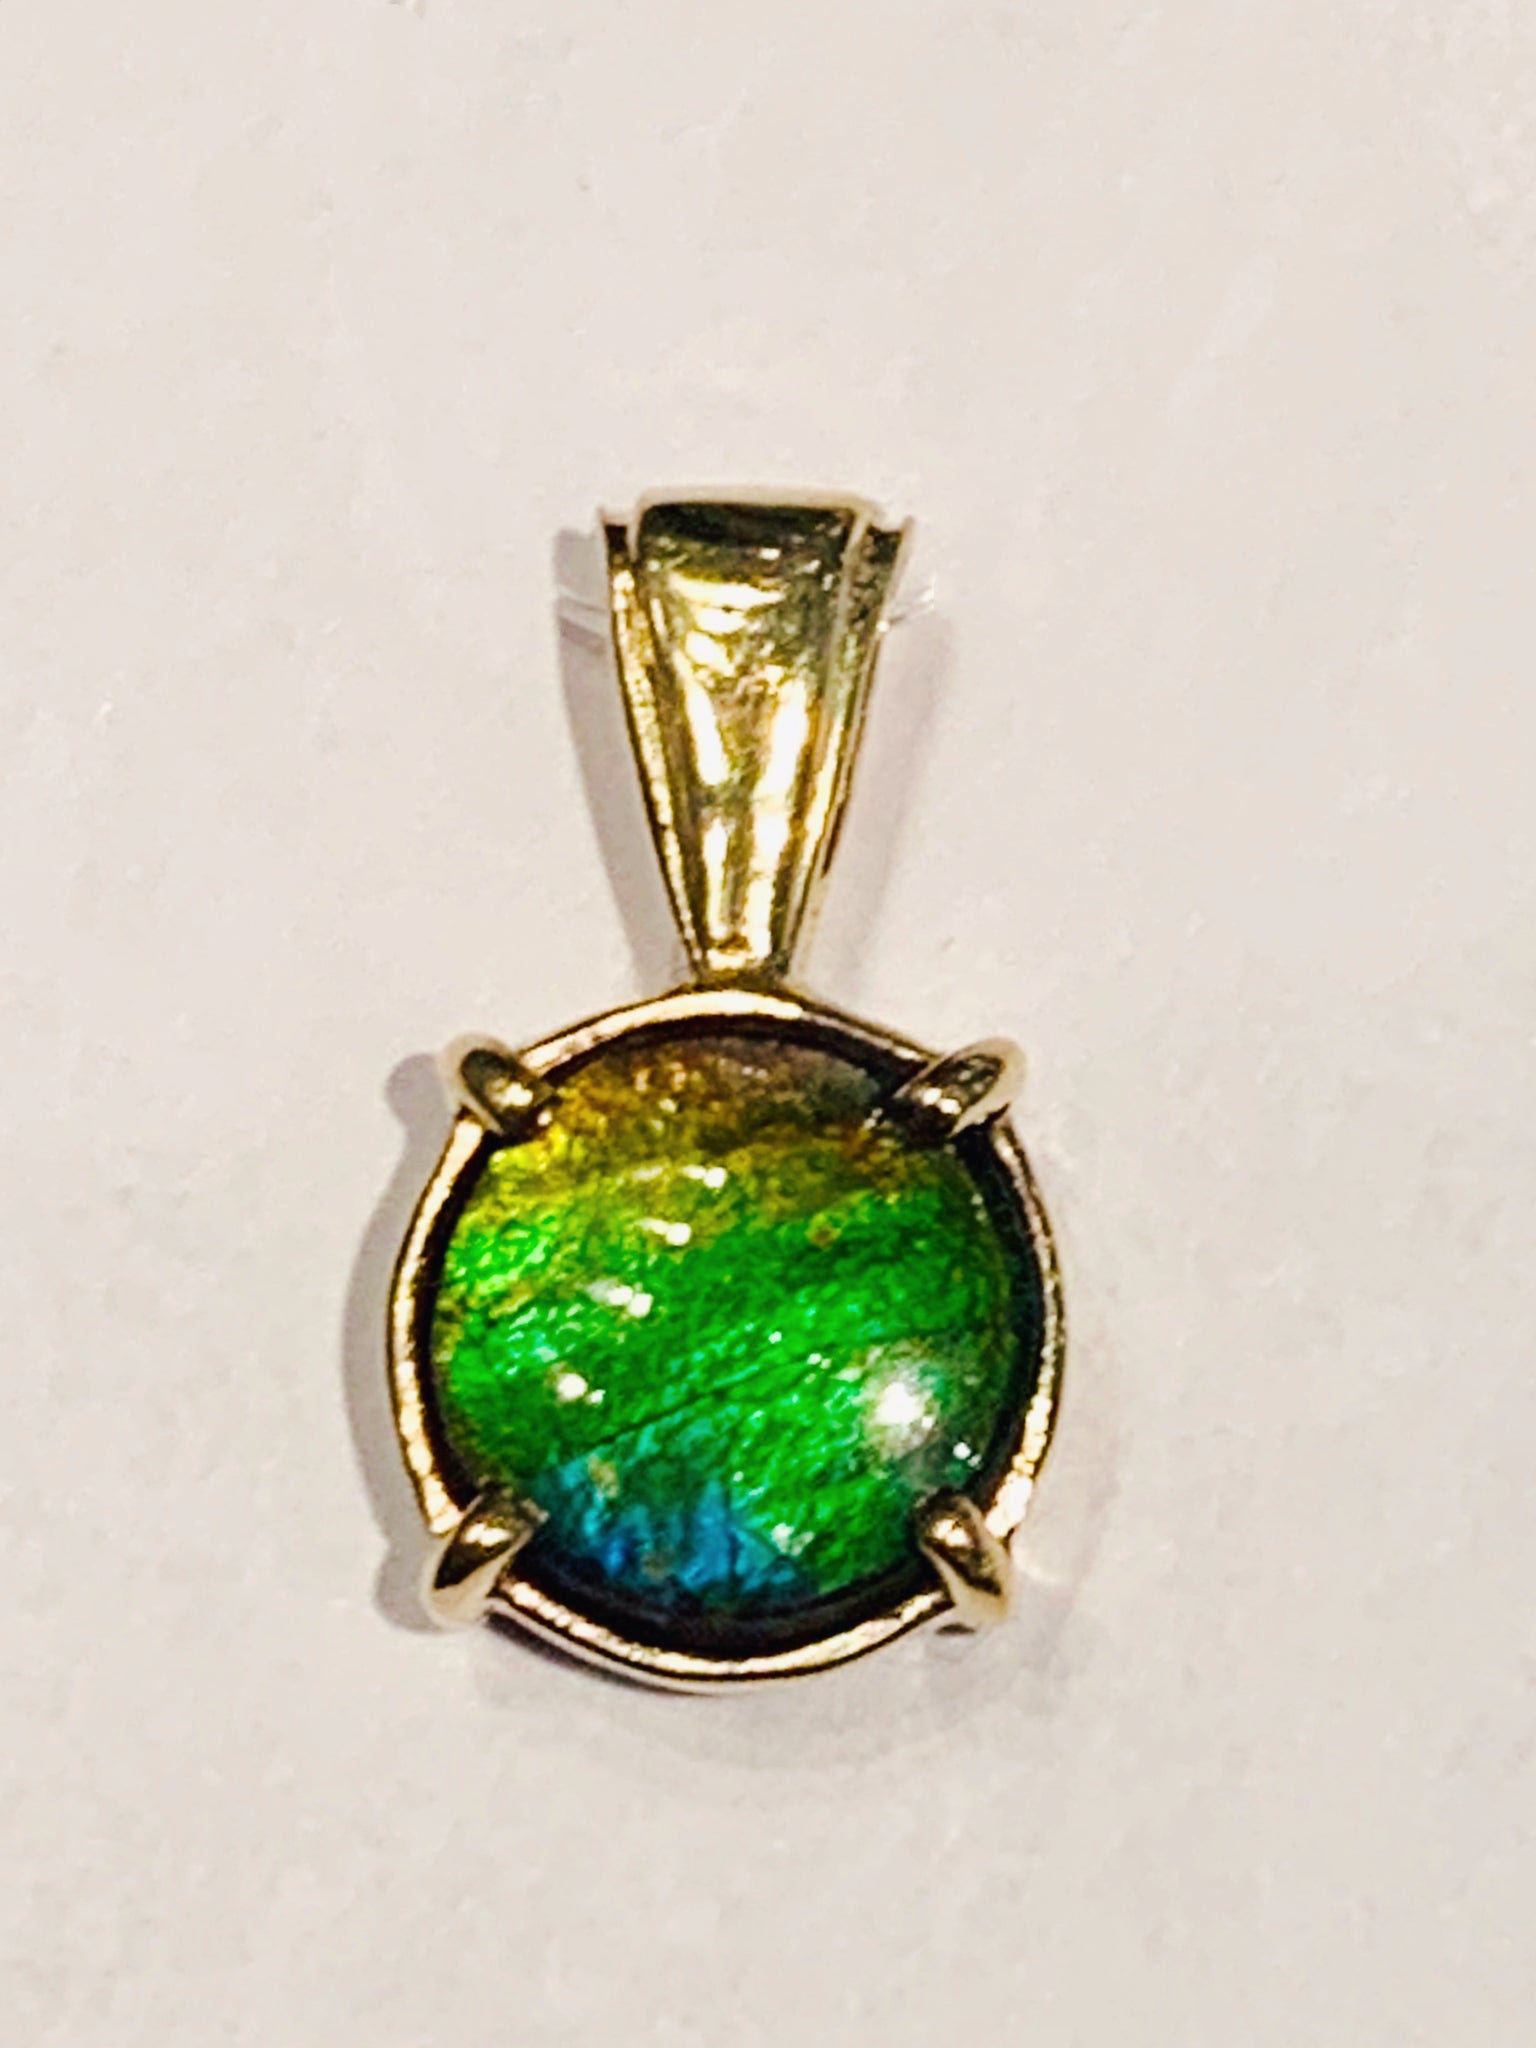 Ammolite Round Bezel set Gold Pendant with Green and Blue PN E20791 %product from Empire Ammolite